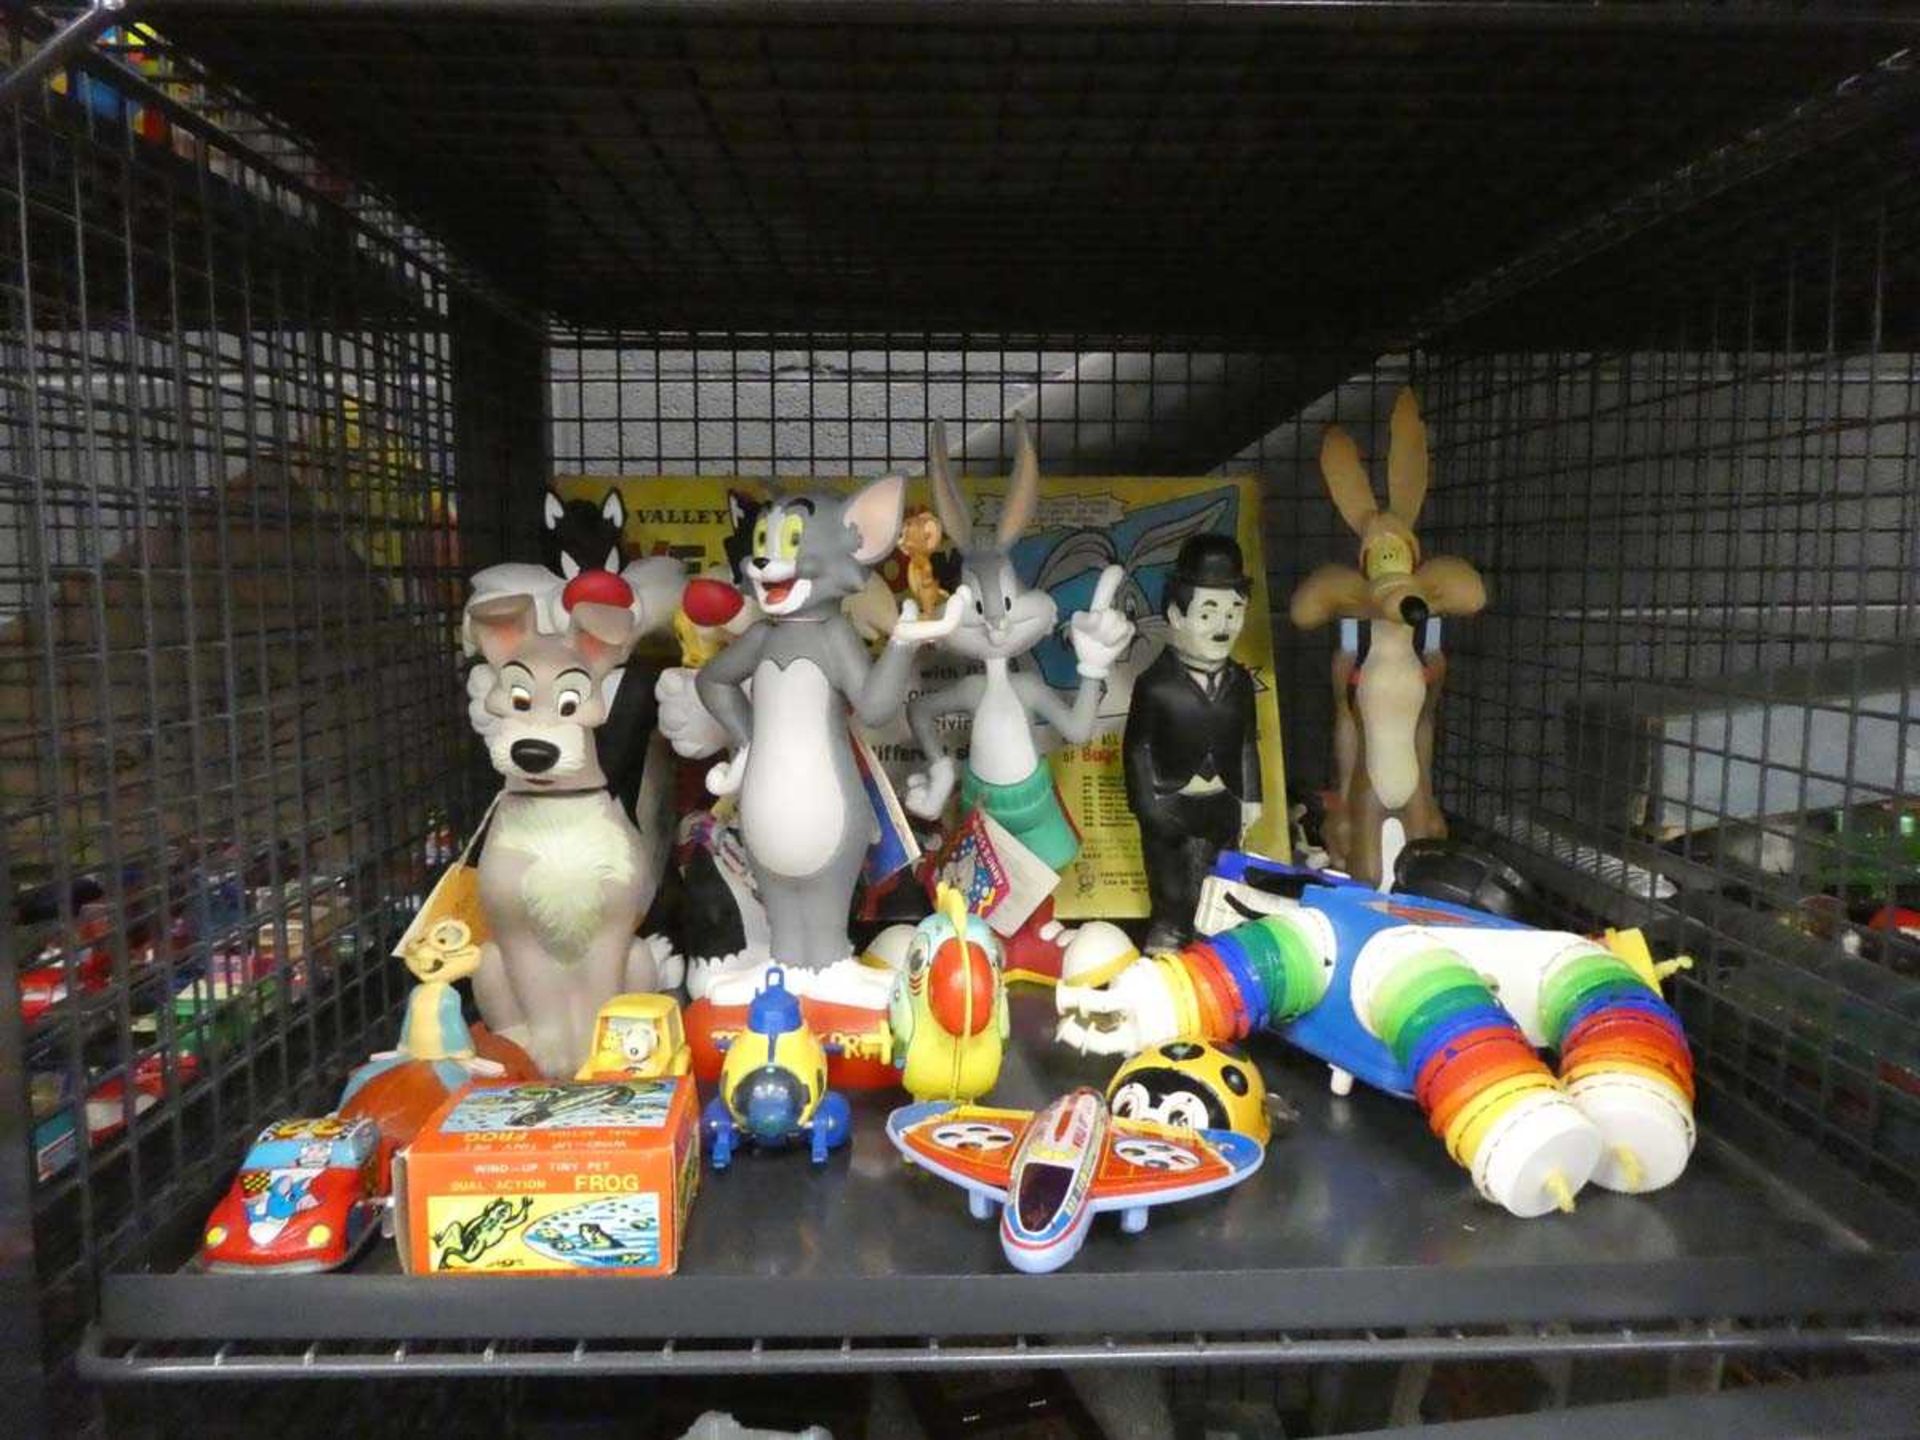 Cage containing Bugs Bunny and other figures plus wind up toys and Charlie Chaplin figure